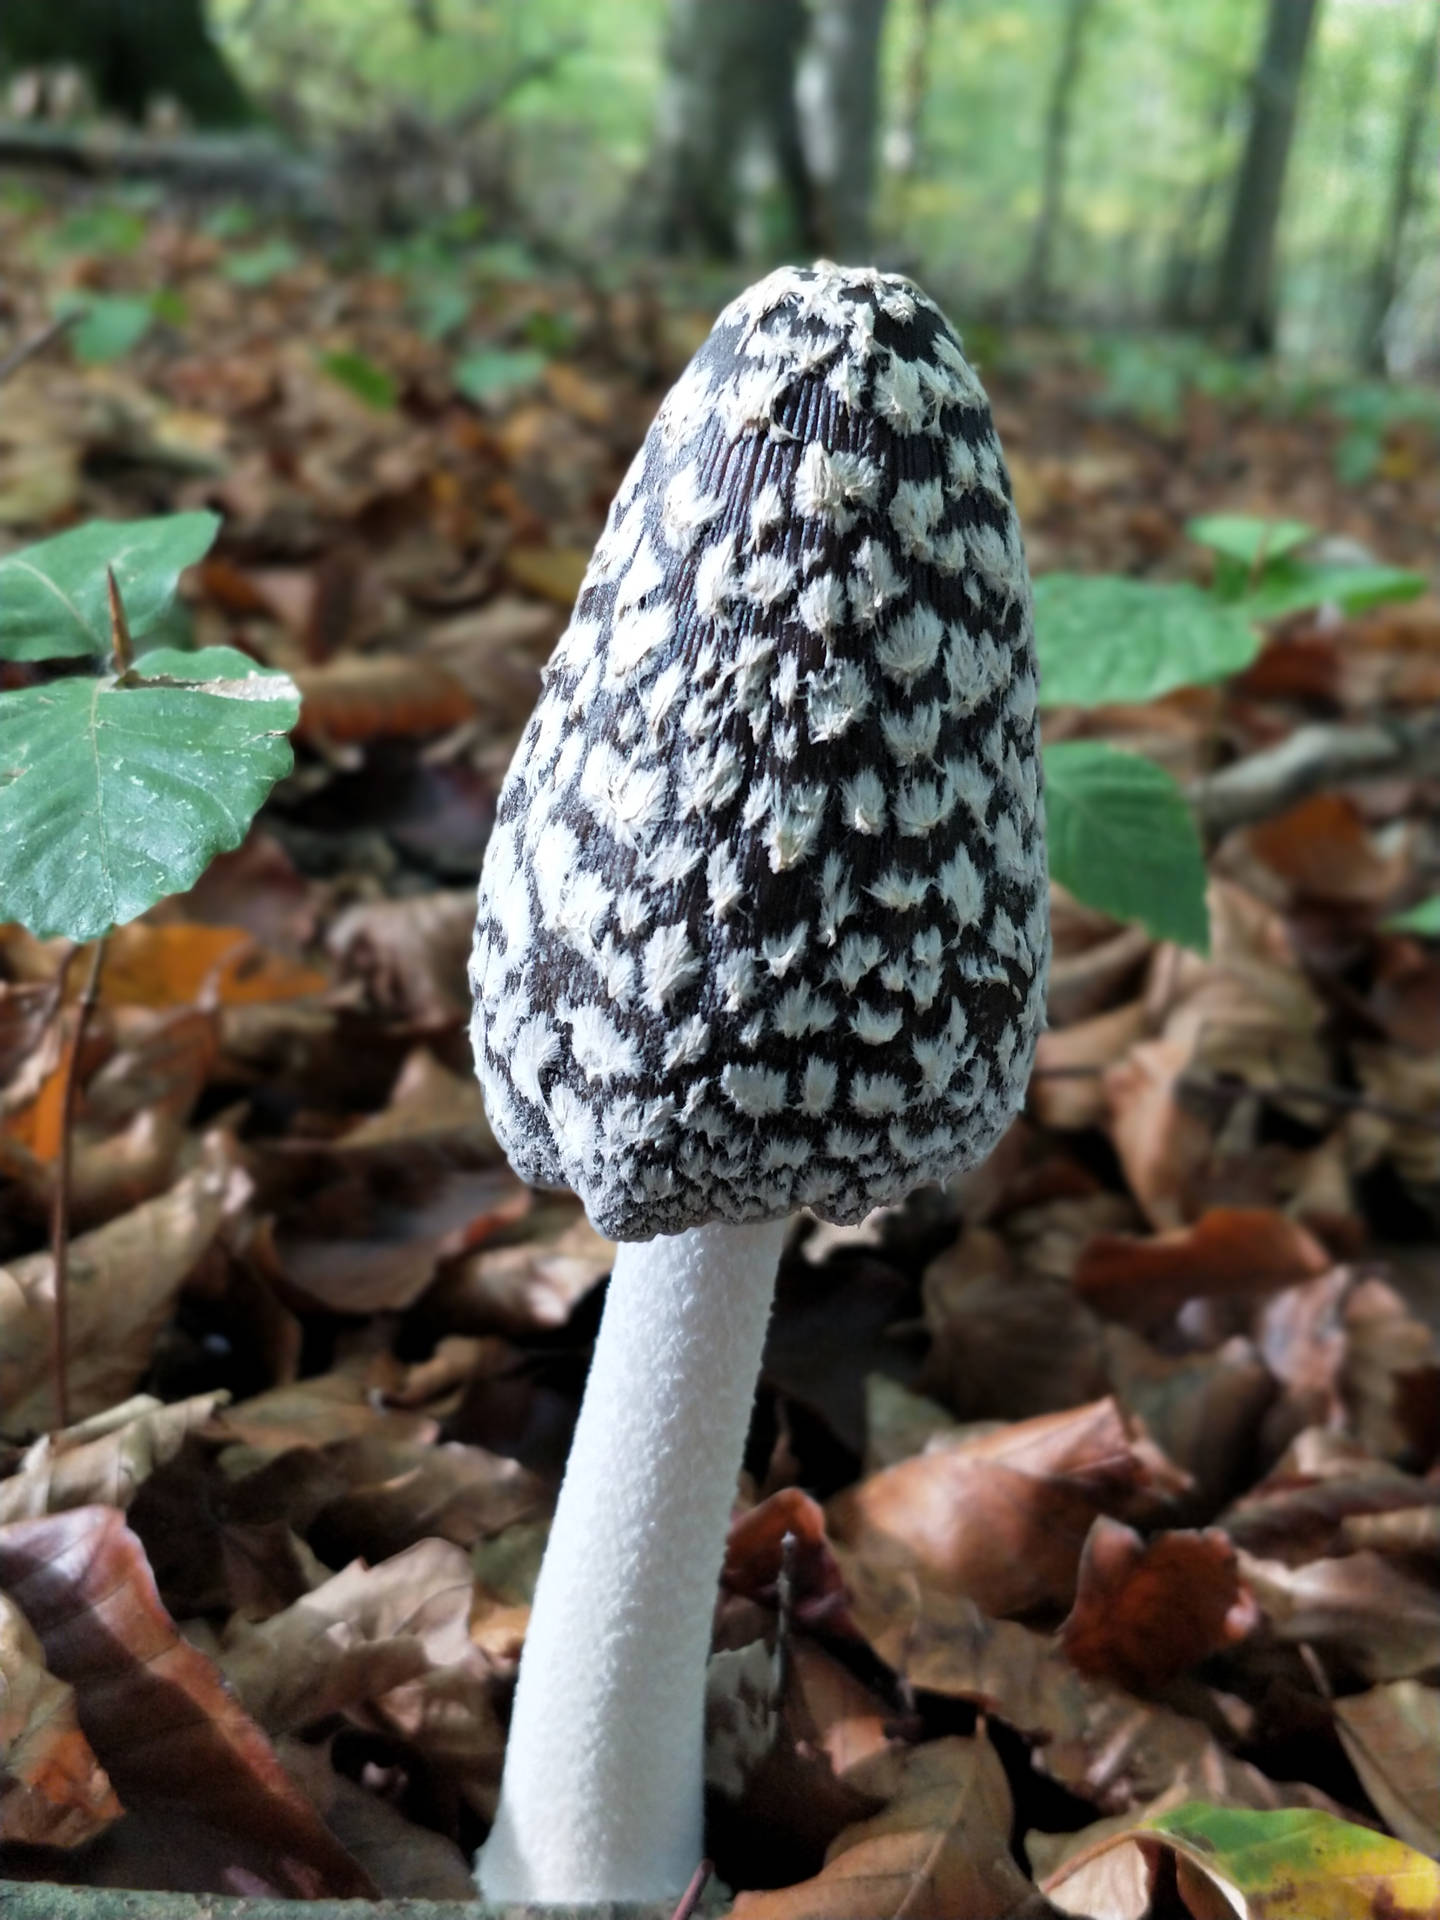 Cute Black And White Mushroom In Forest Background